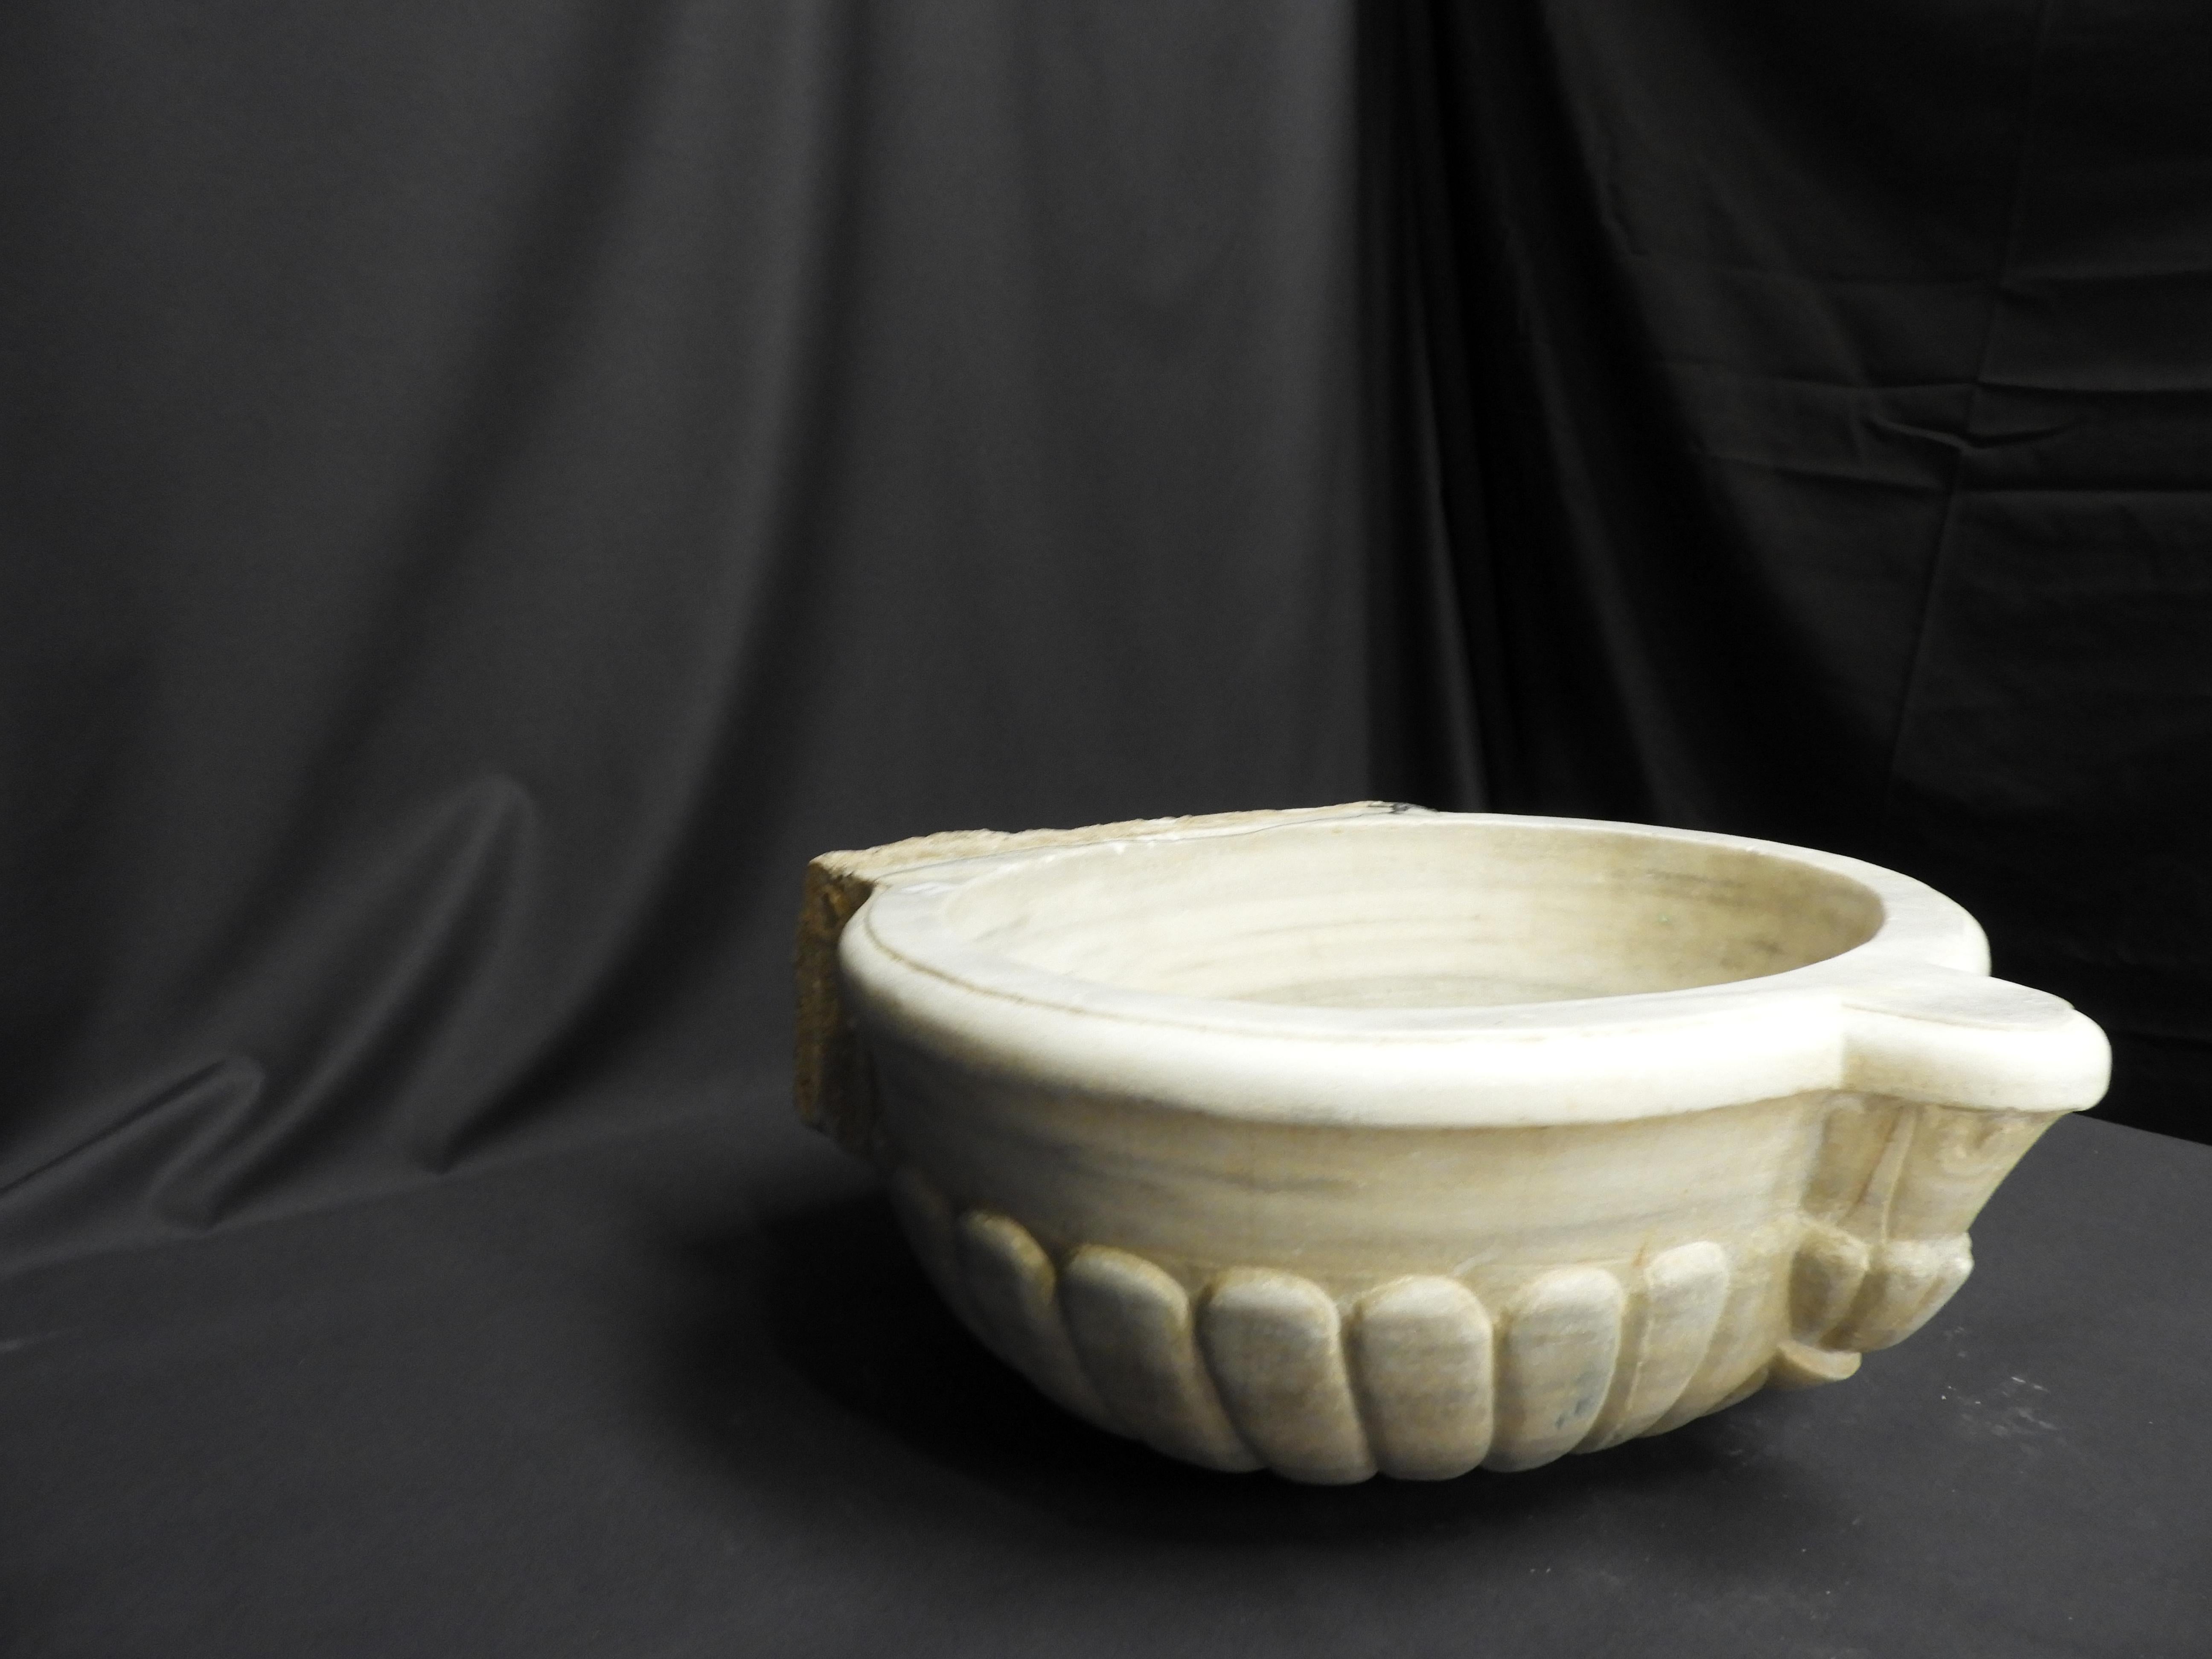 Turkish Antique White Marble Sink For Sale